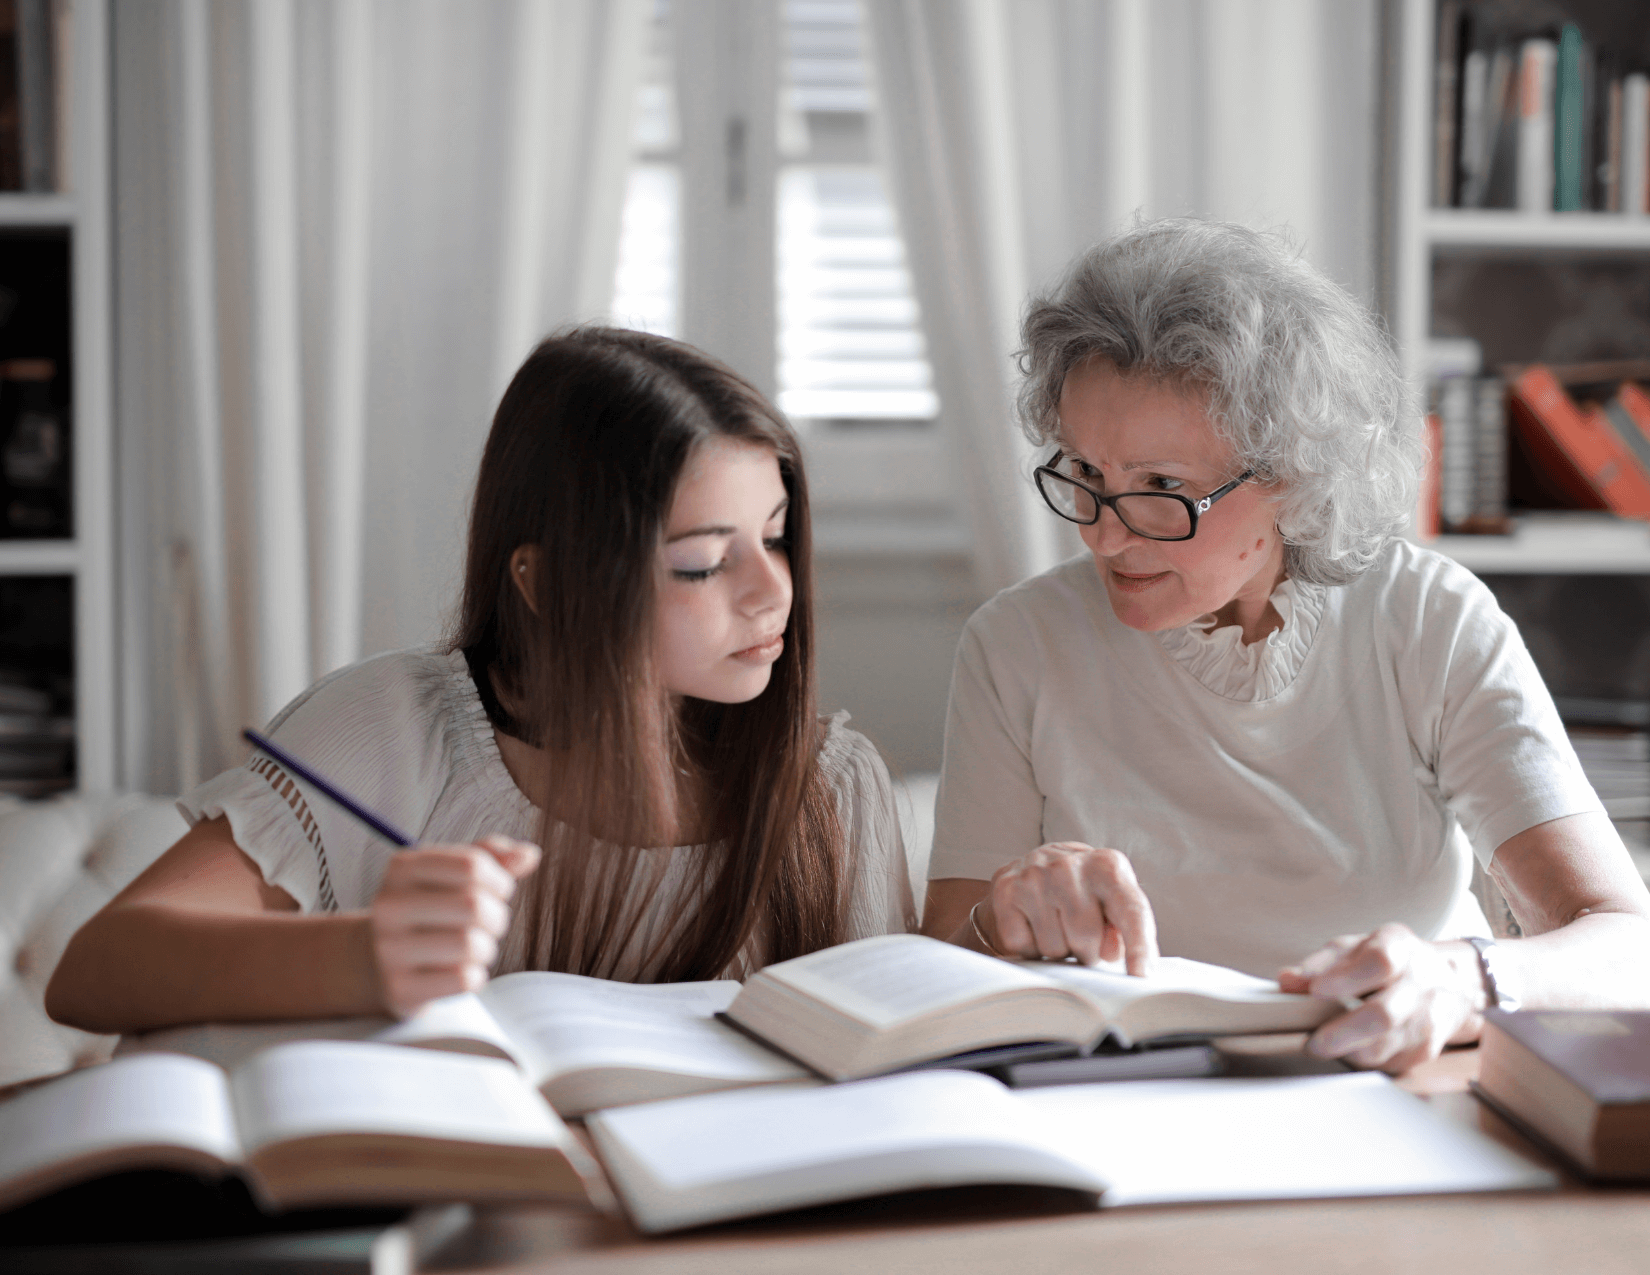 Grandmother helping child with schoolwork